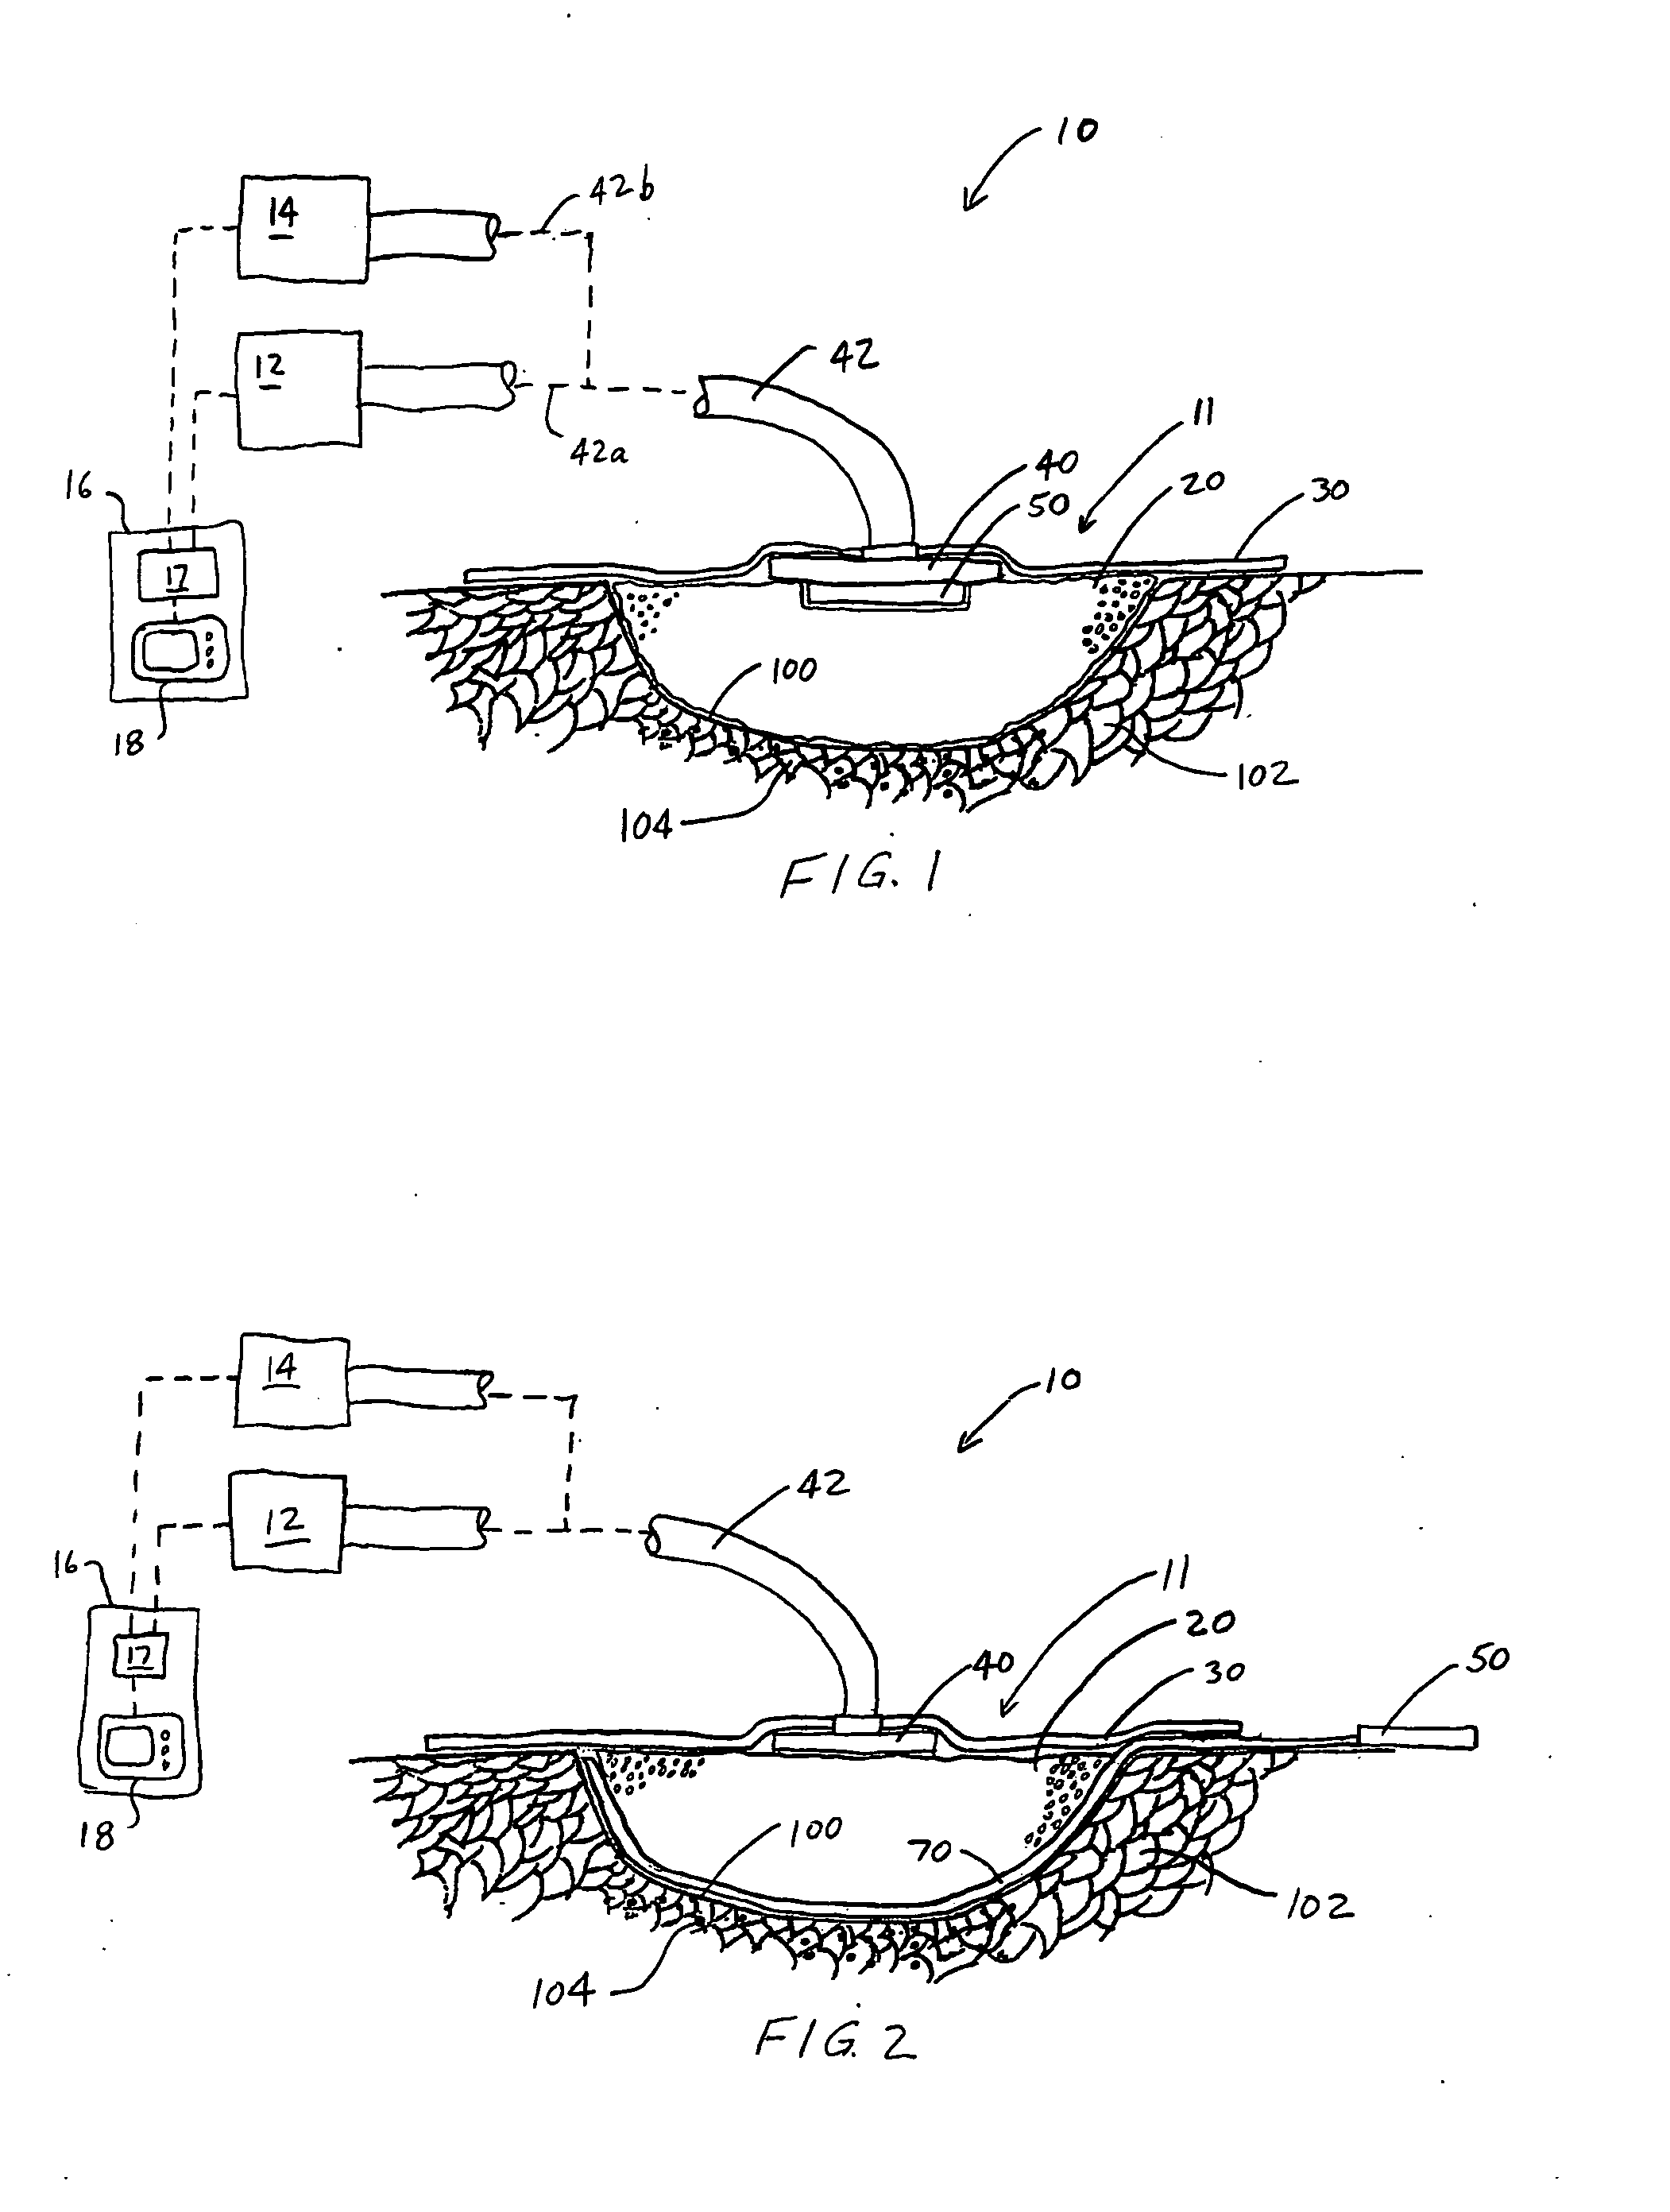 System and method for treating a wound using ultrasonic debribement